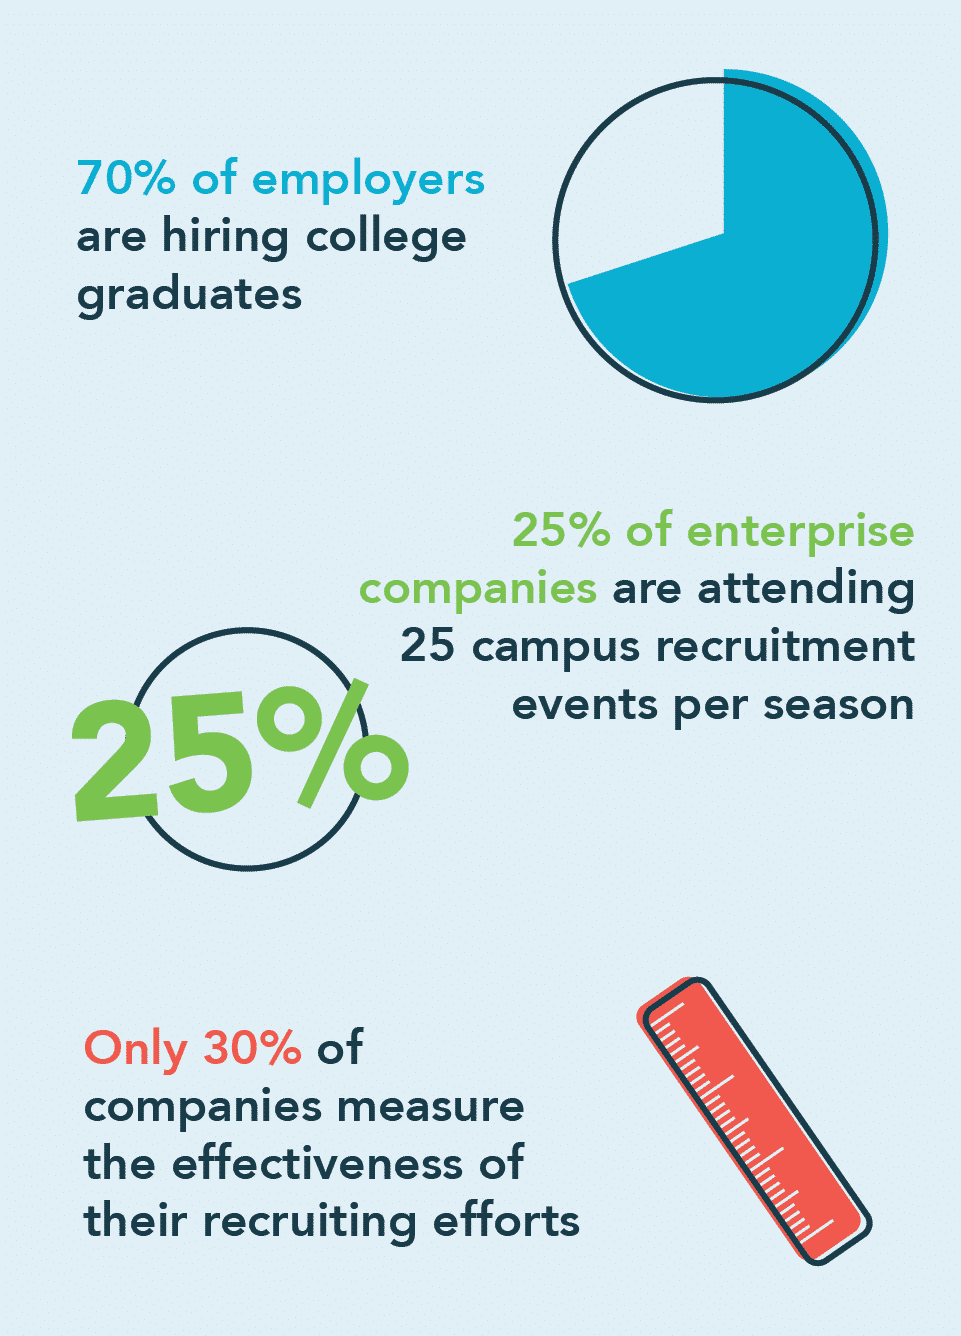 An infographic showing the effectiveness of recruitment events